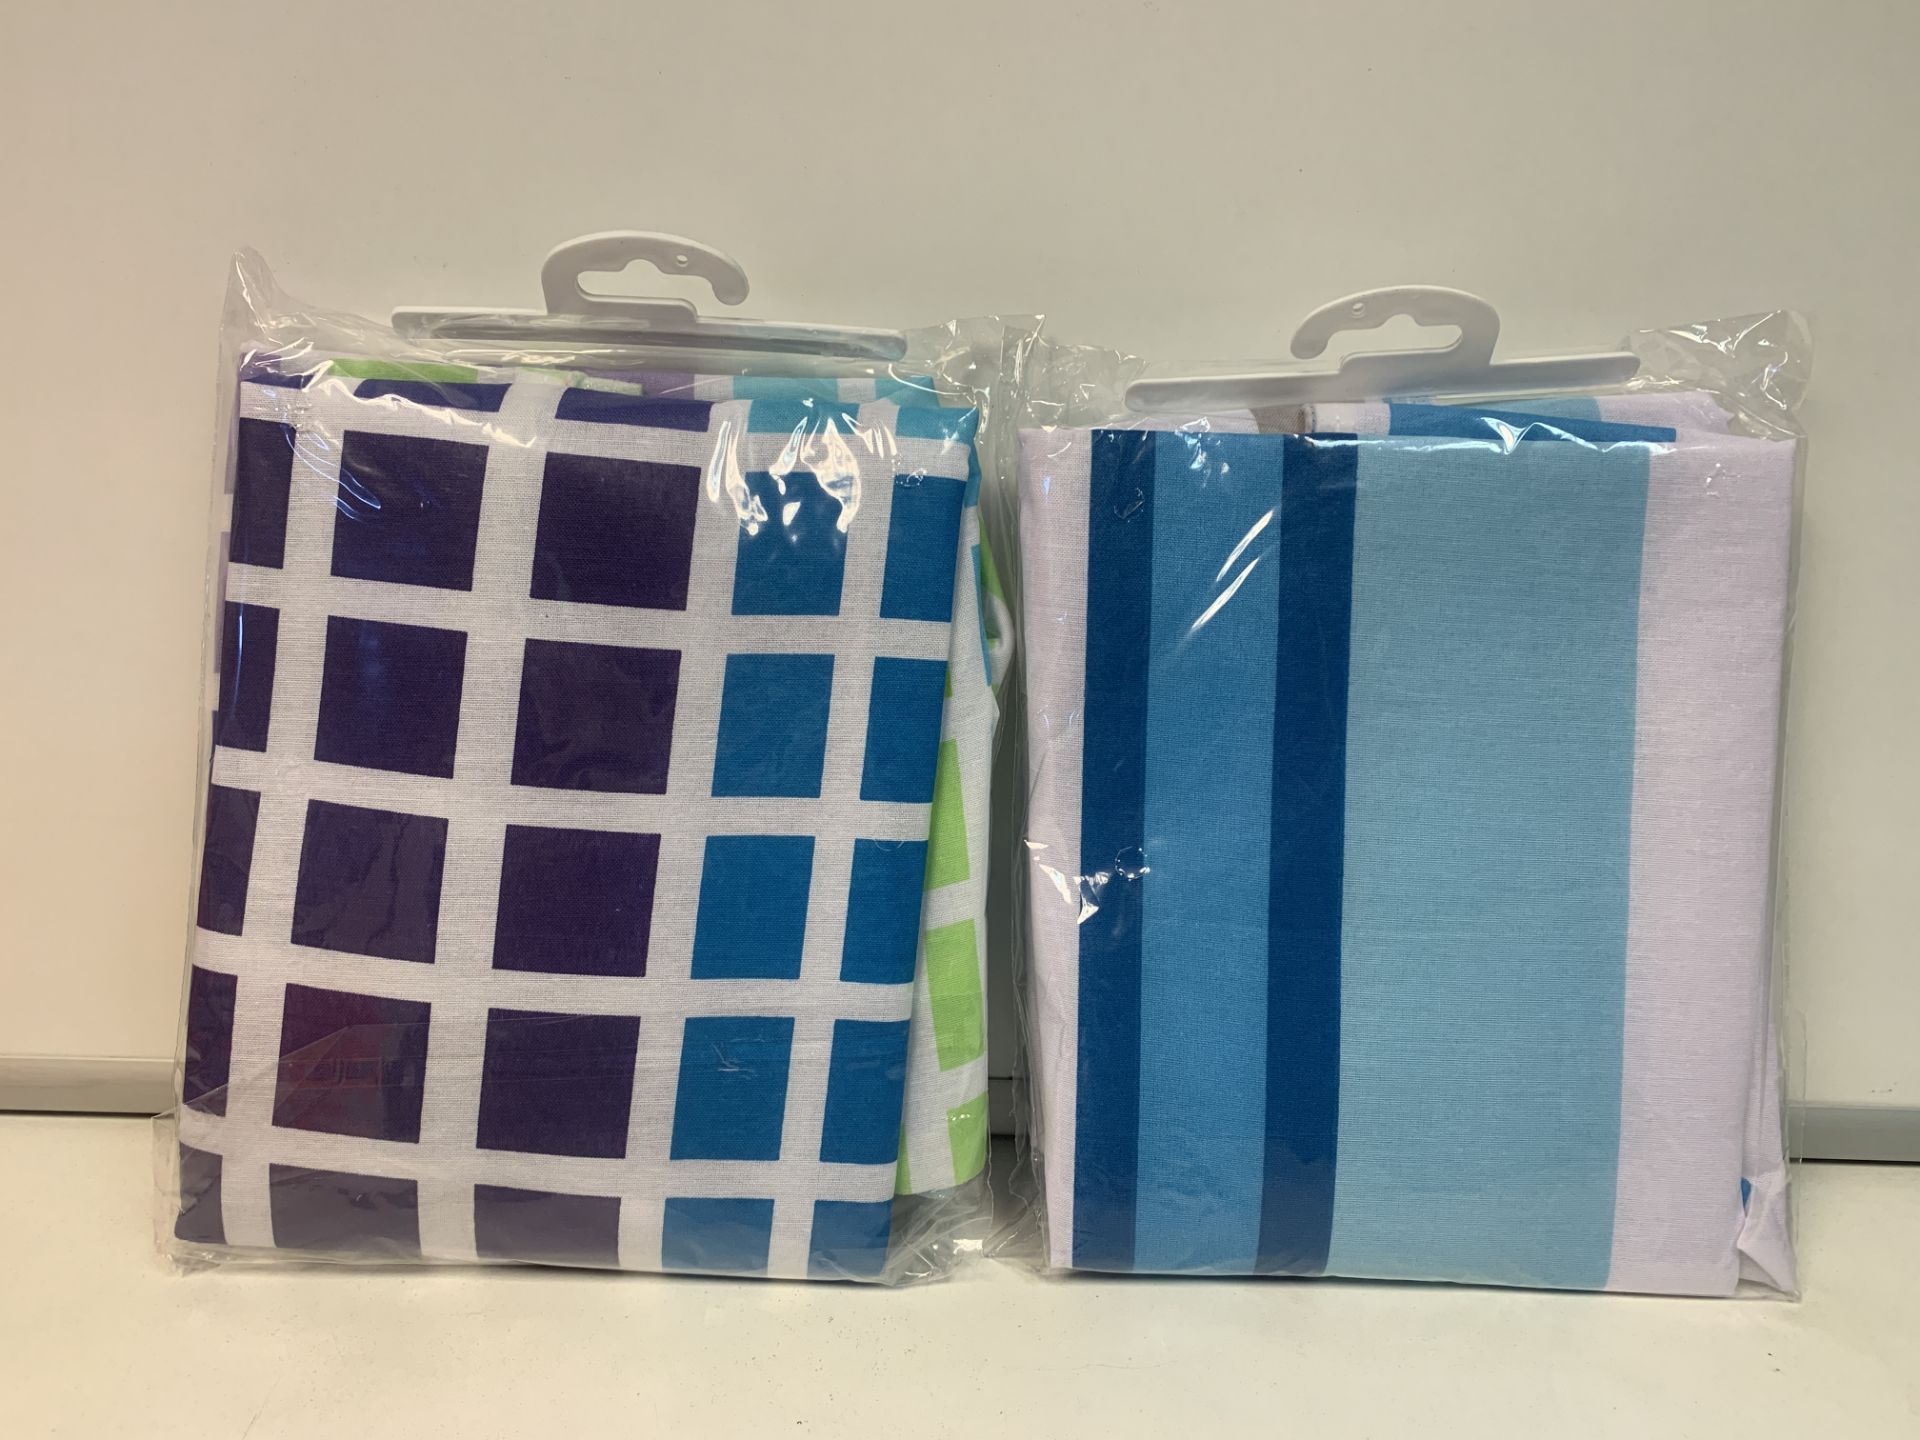 60 X BRAND NEW IRONING BOARD COVERS IN VARIOUS STYLES R9